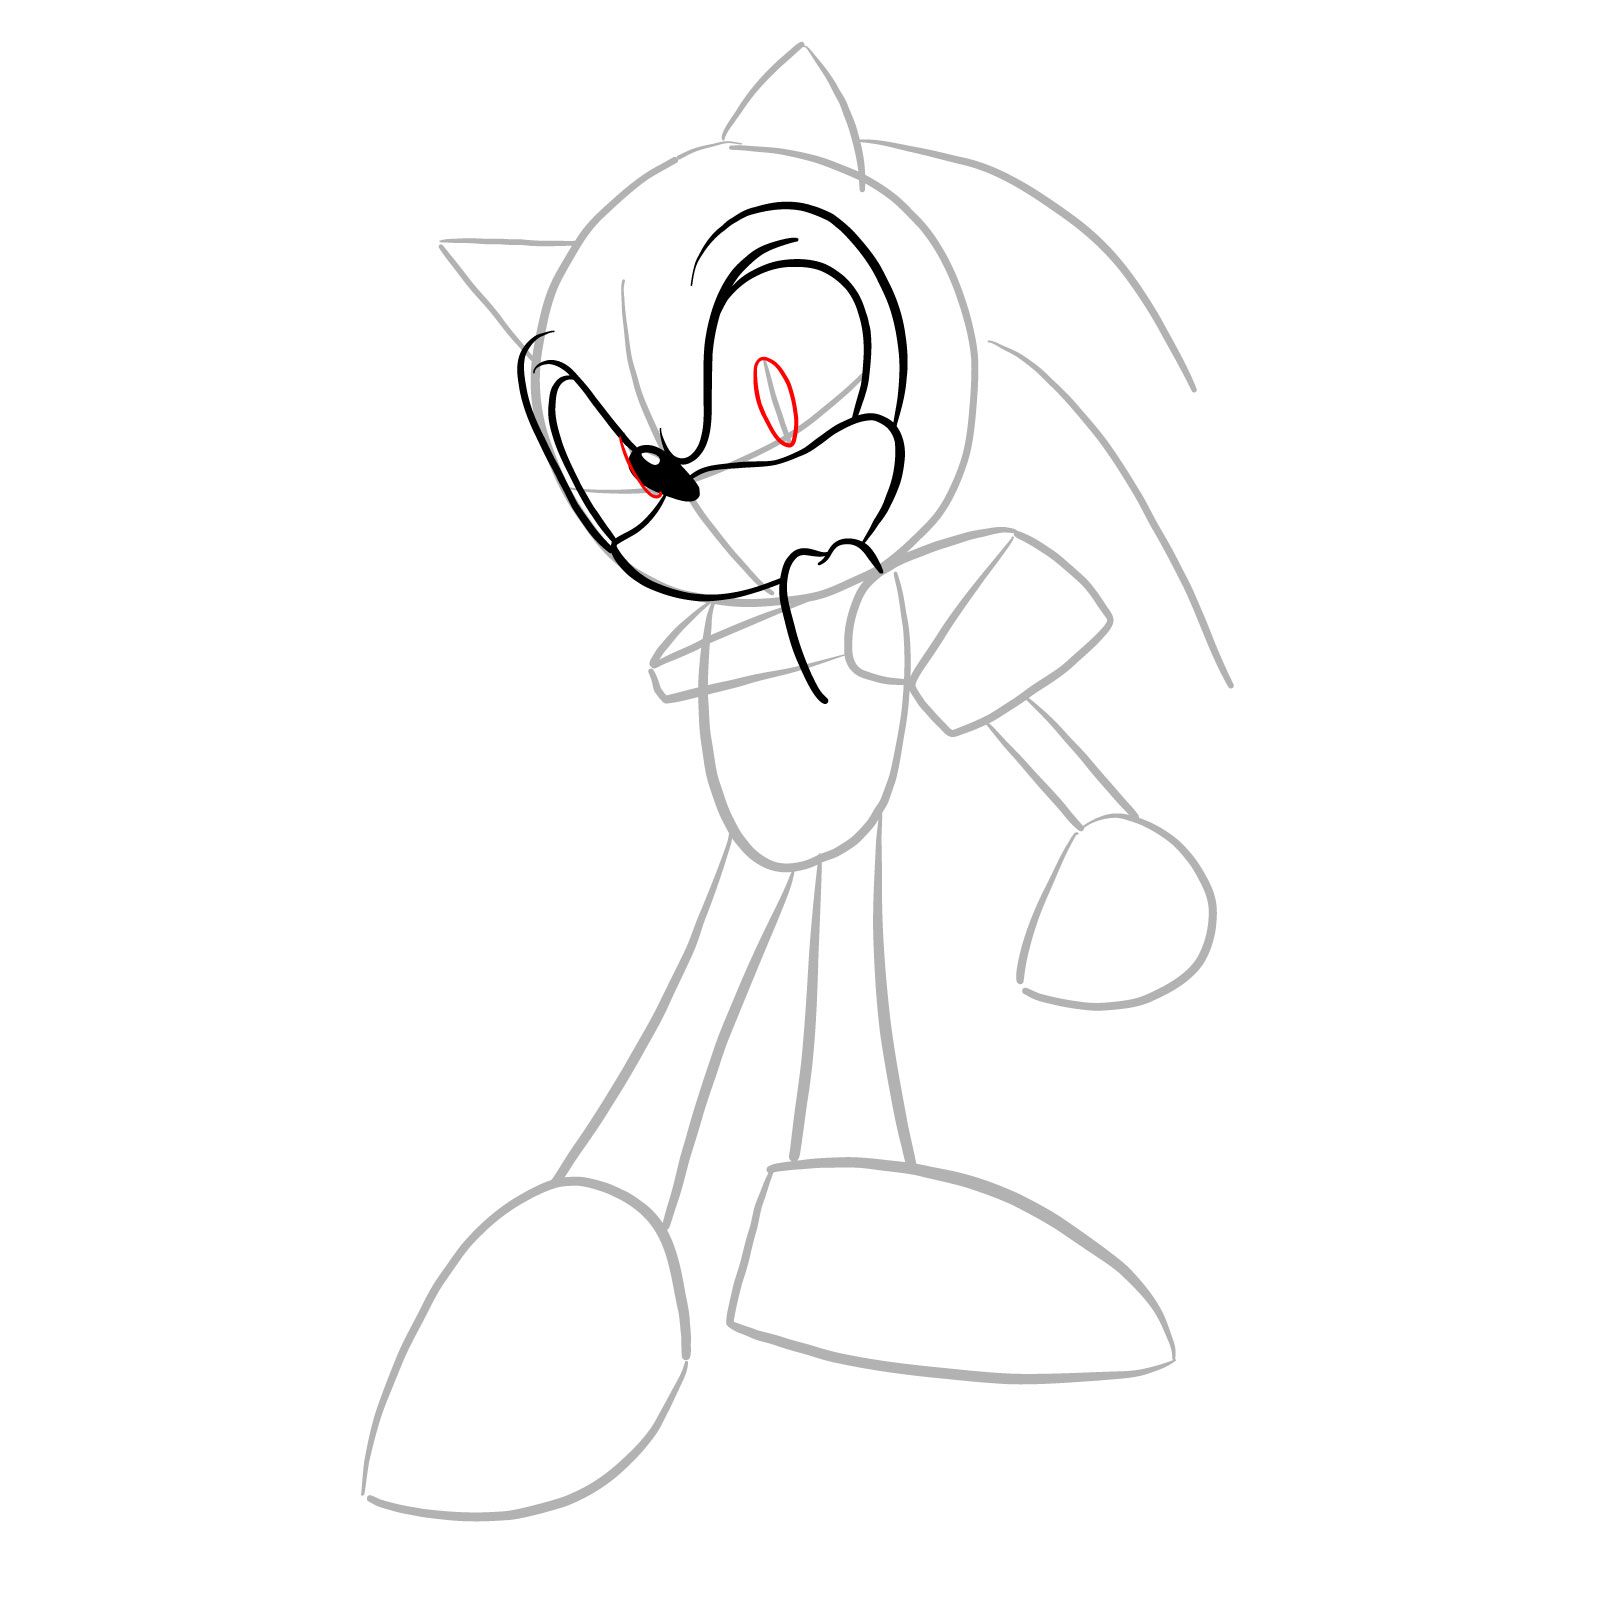 How to draw Coldsteel the Hedgehog - step 09